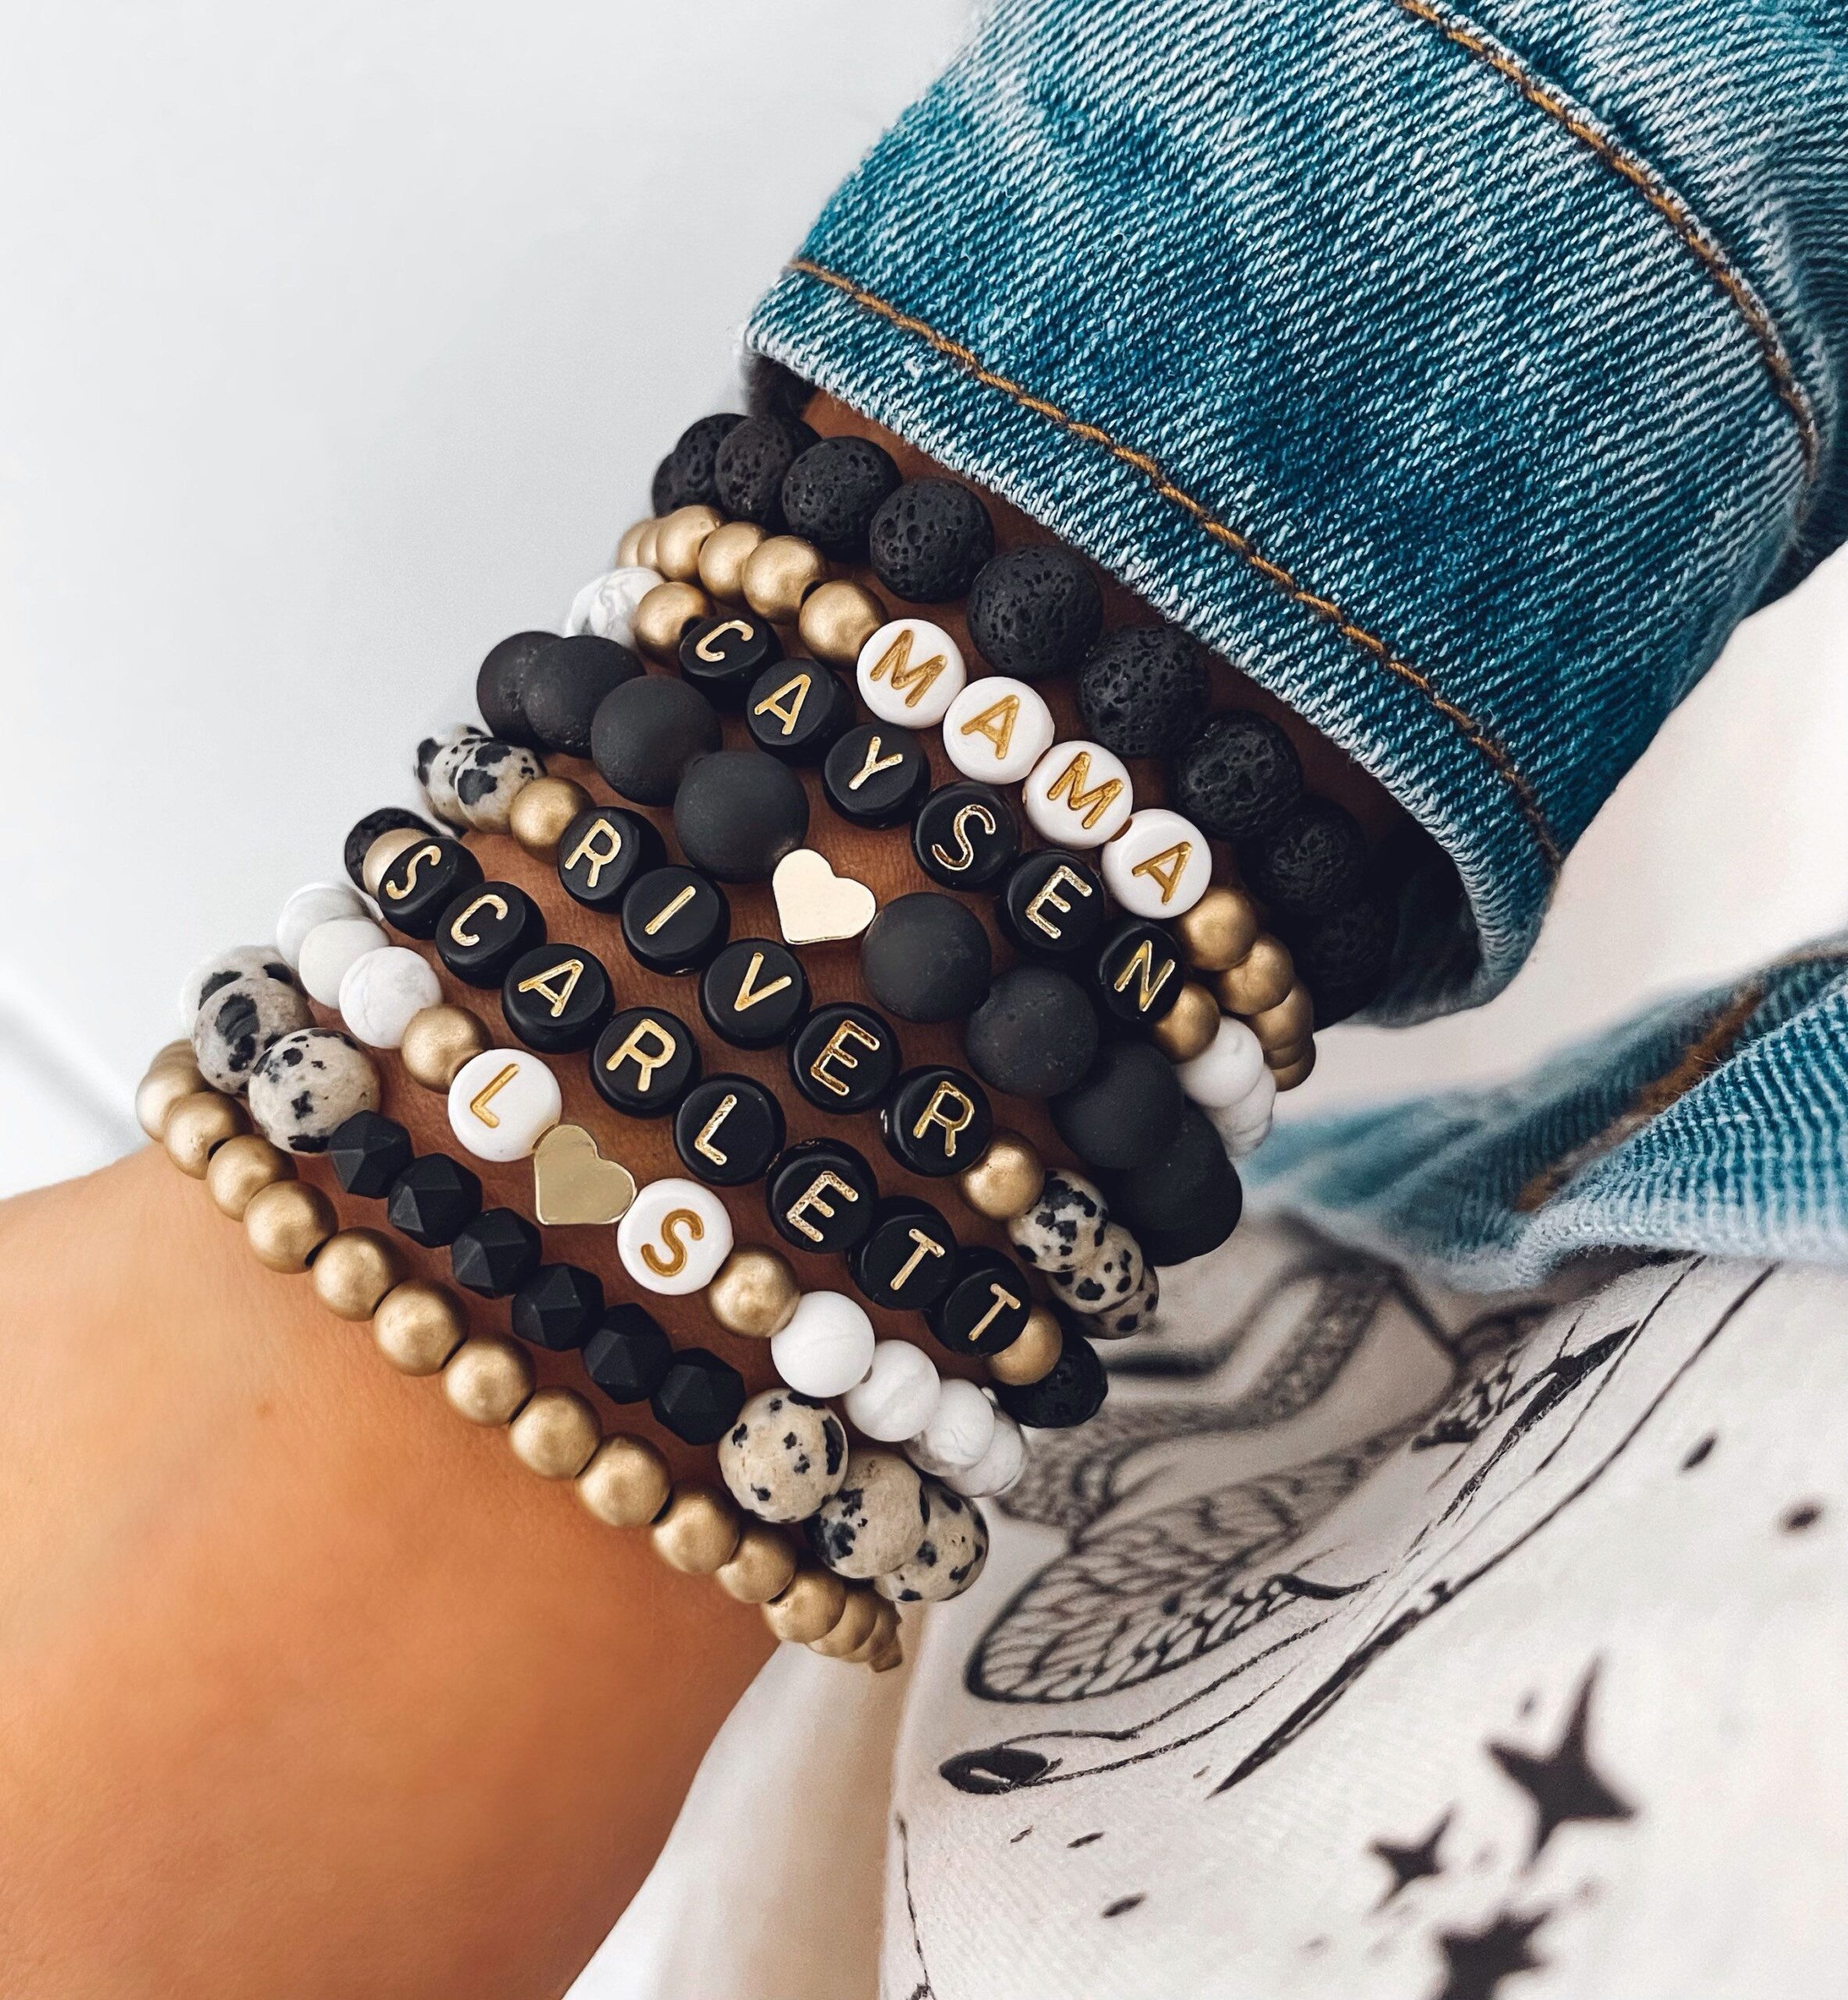 Go crazy to explore the feelings with Name bracelets